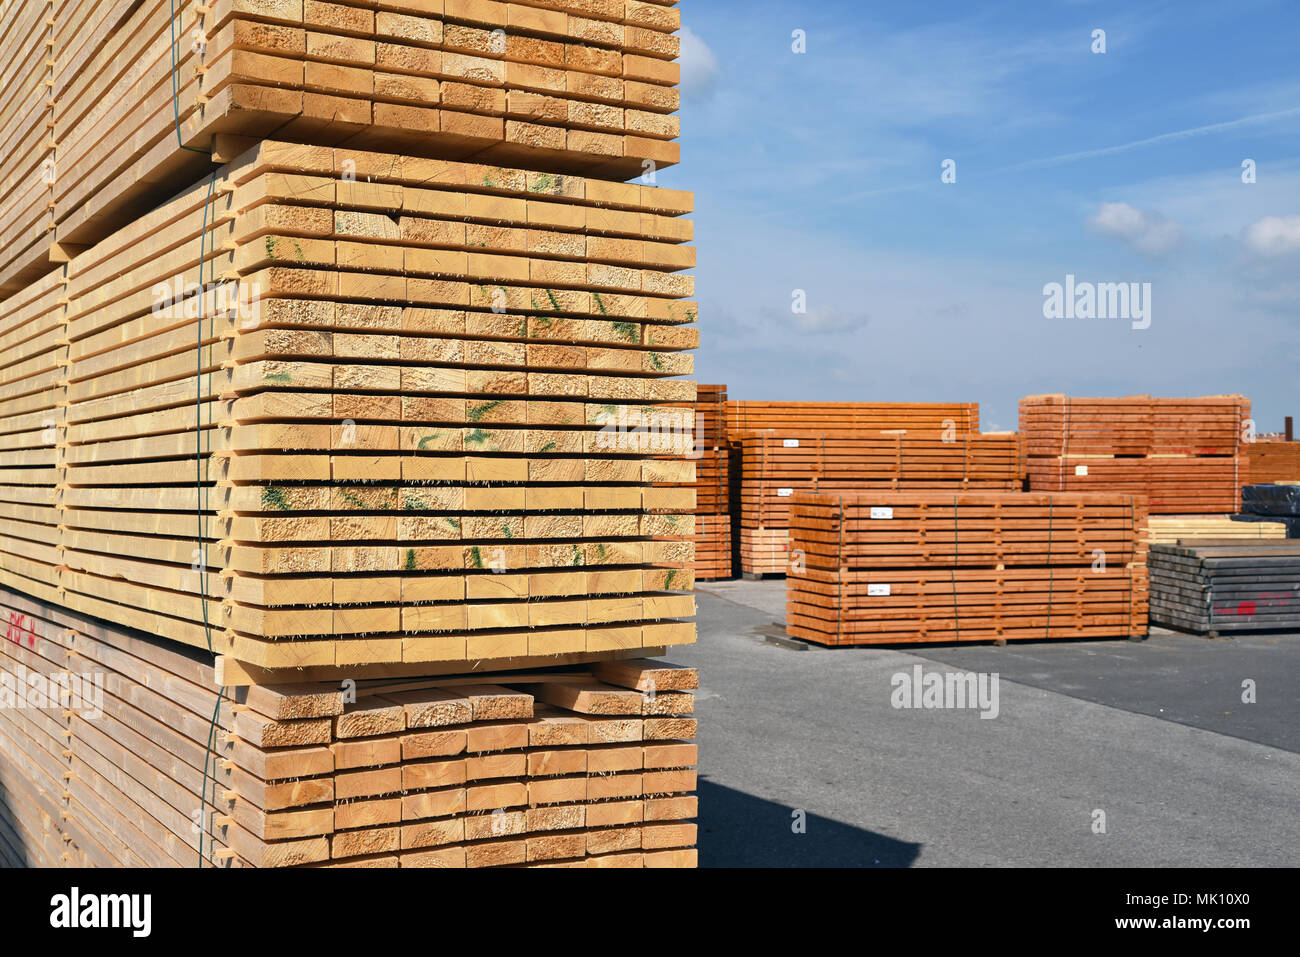 Industrial plant sawmill - storage of wooden boards Stock Photo